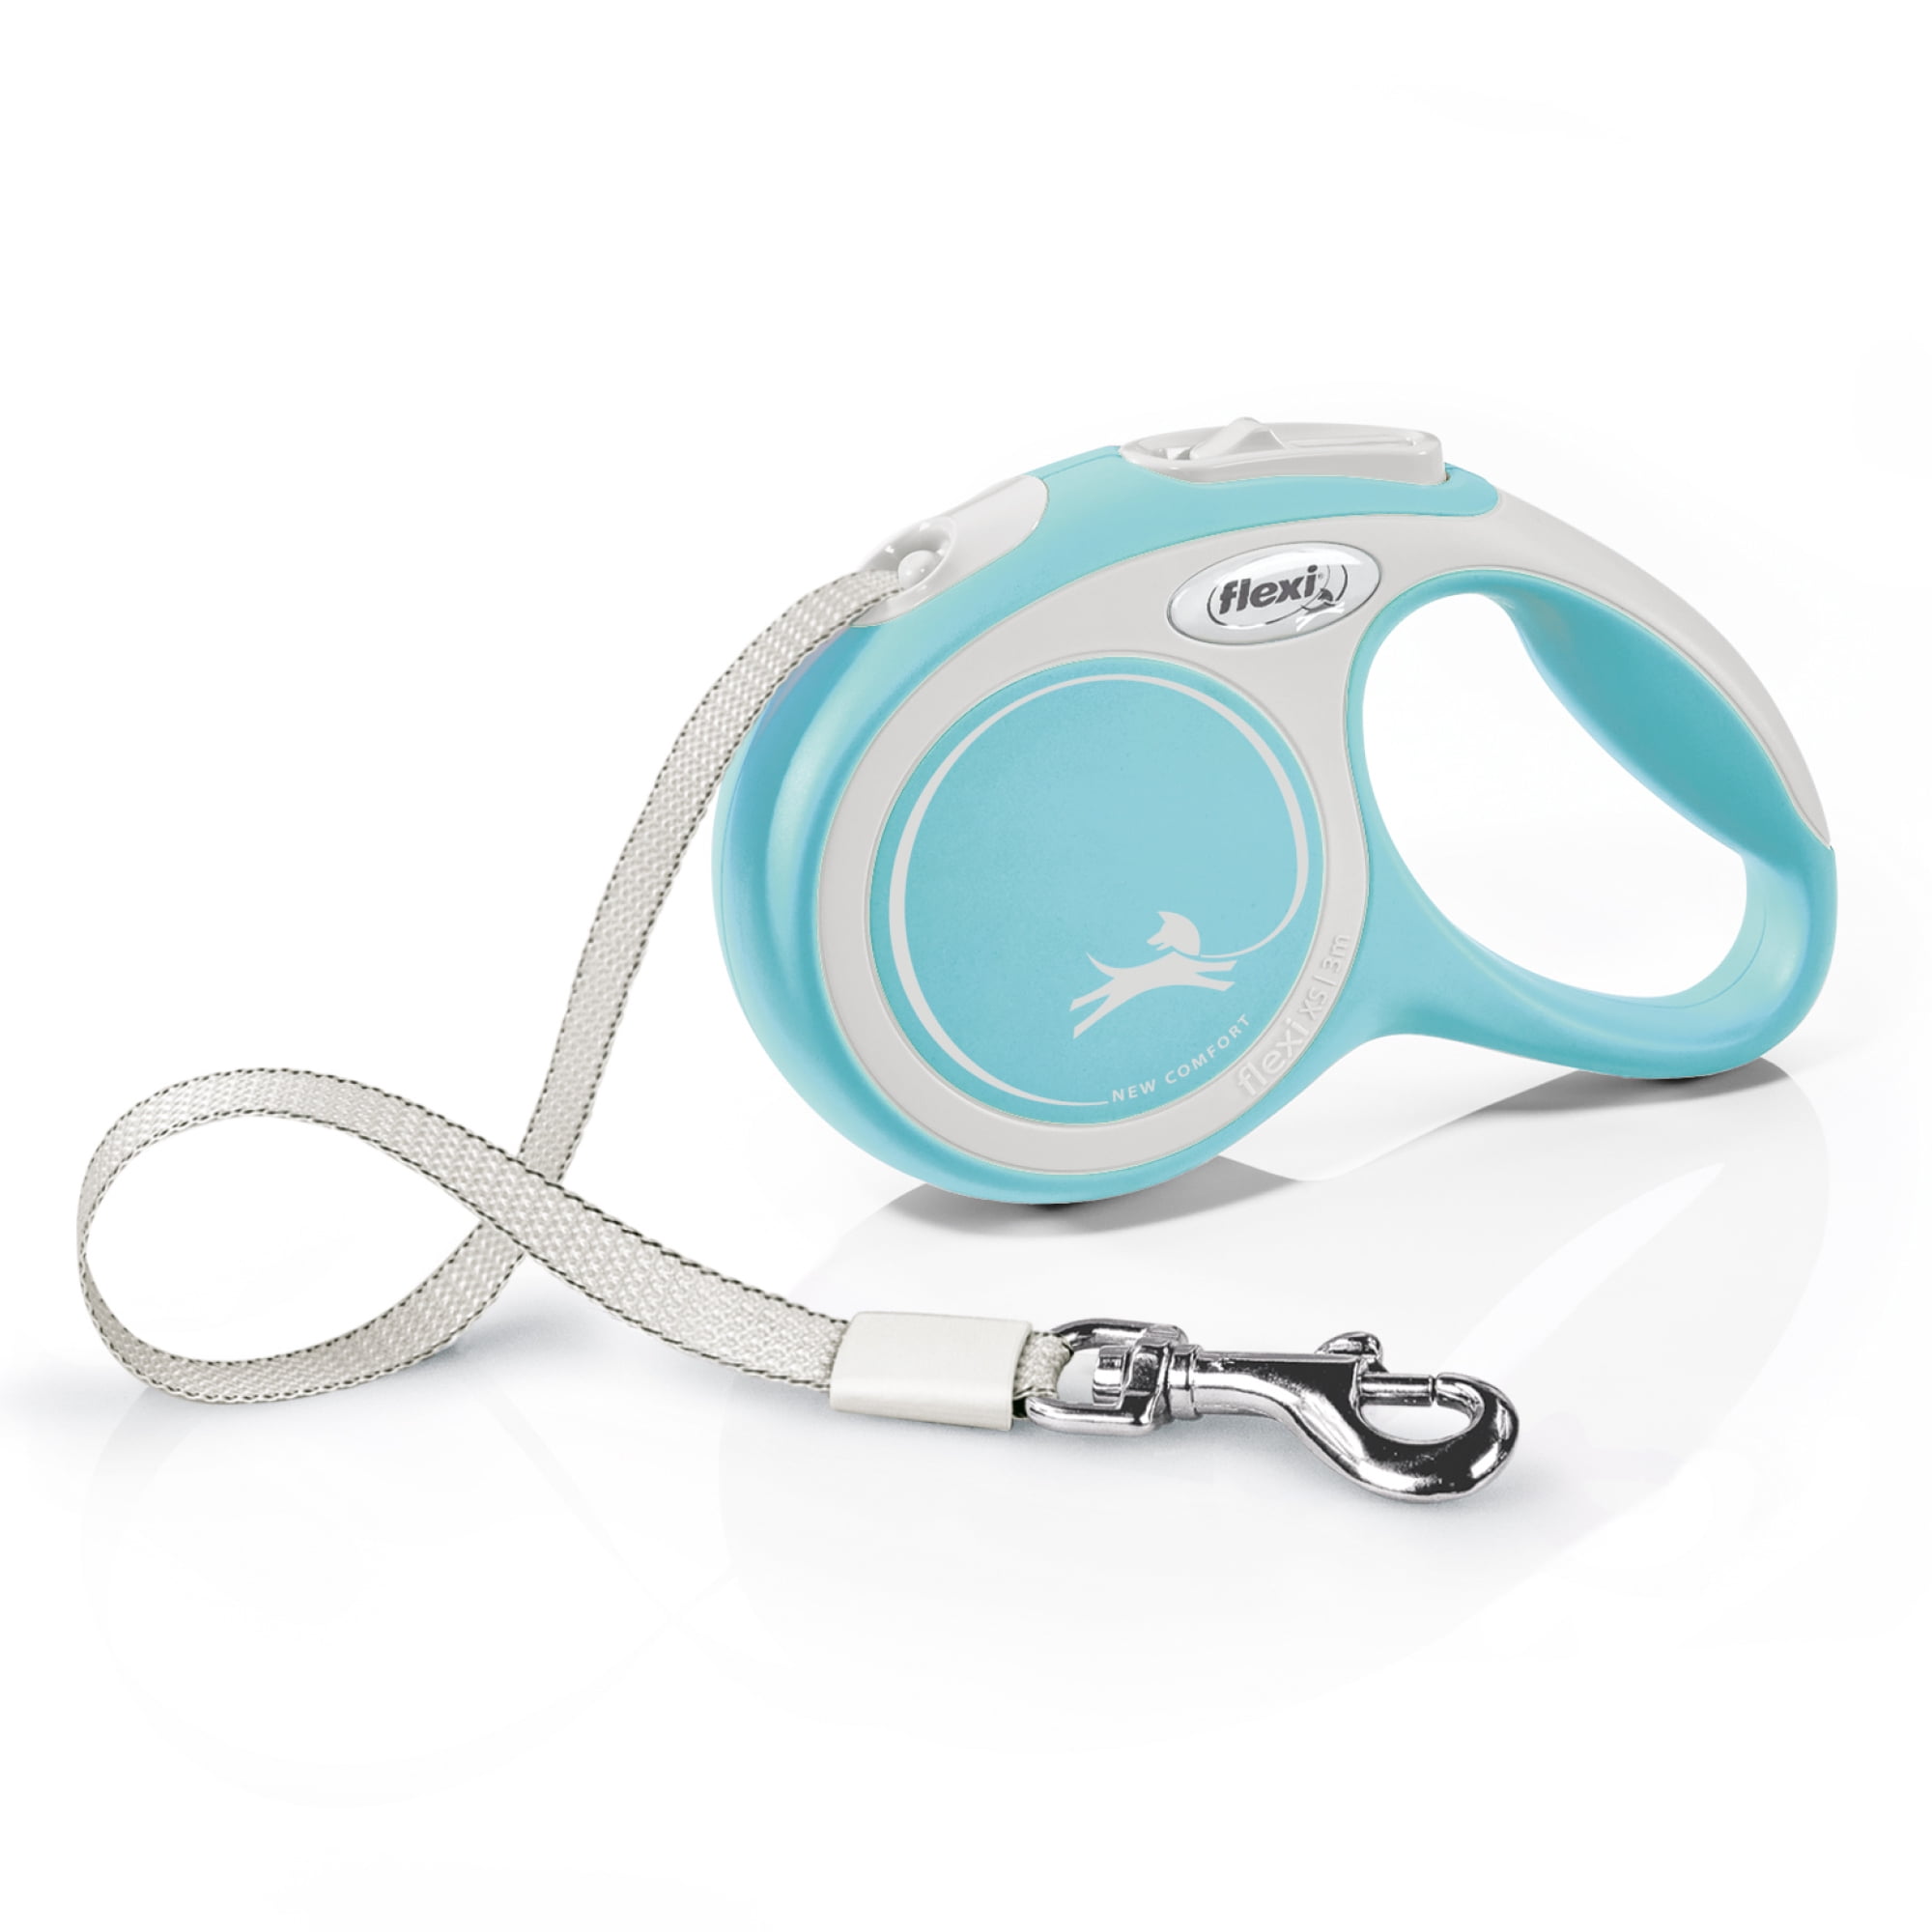 Flexi North America 860702 10 Ft. 26 Lbs Flexi New Comfort Tape Leash - Extre Small, Blue